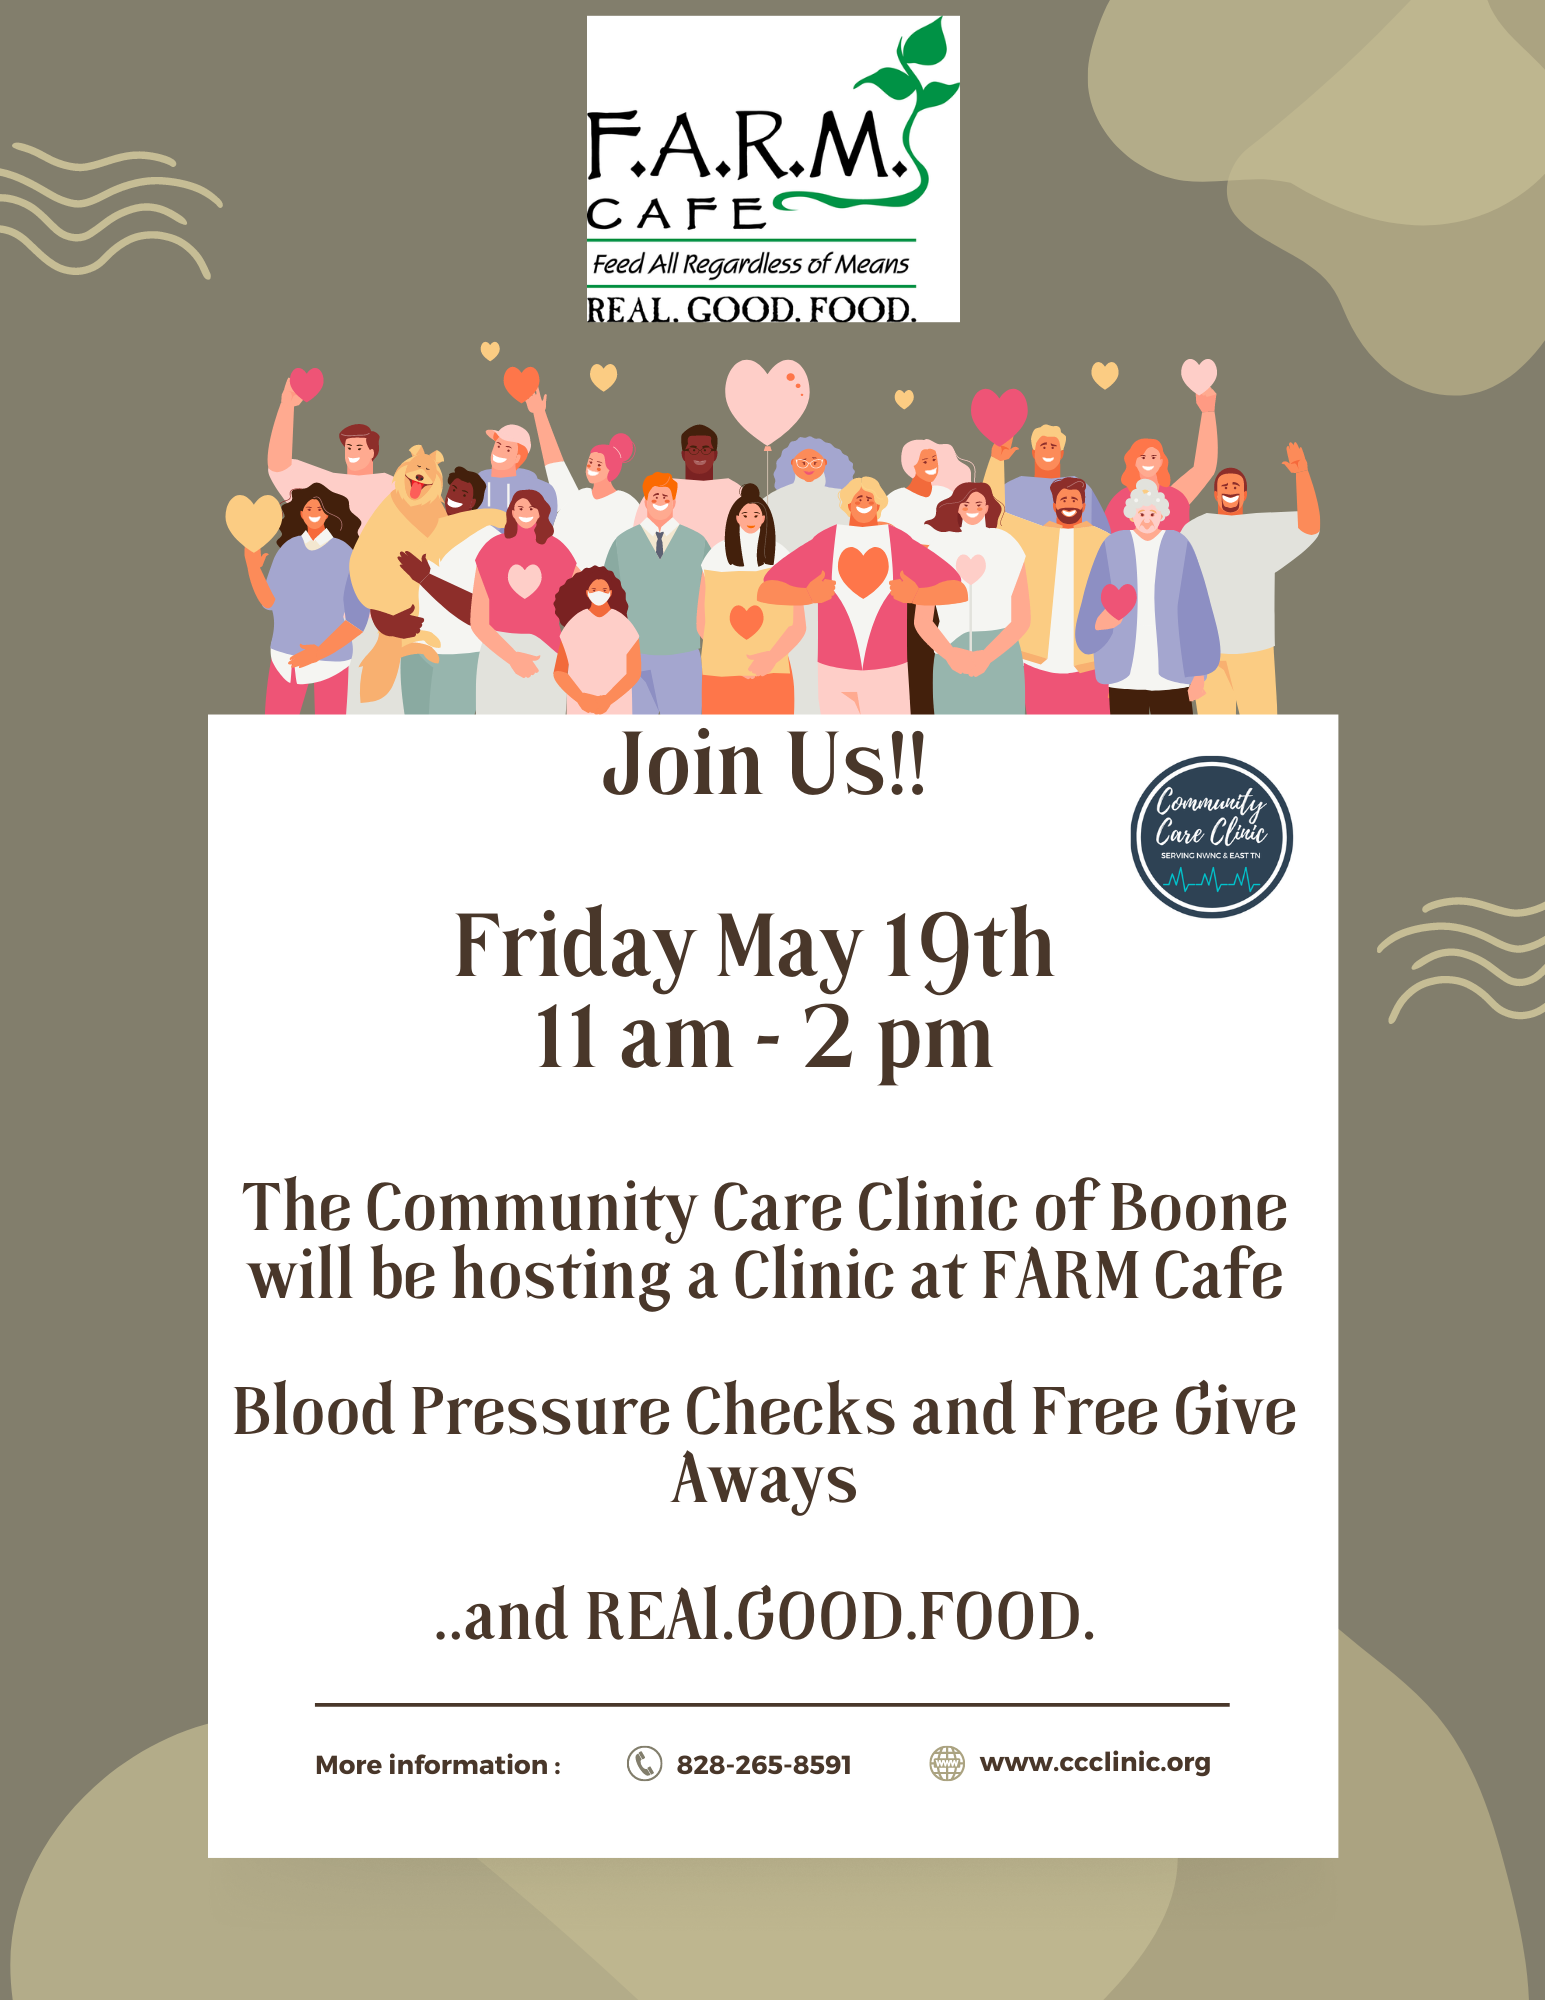 CCC Pop Up Clinic at F.A.R.M. Cafe